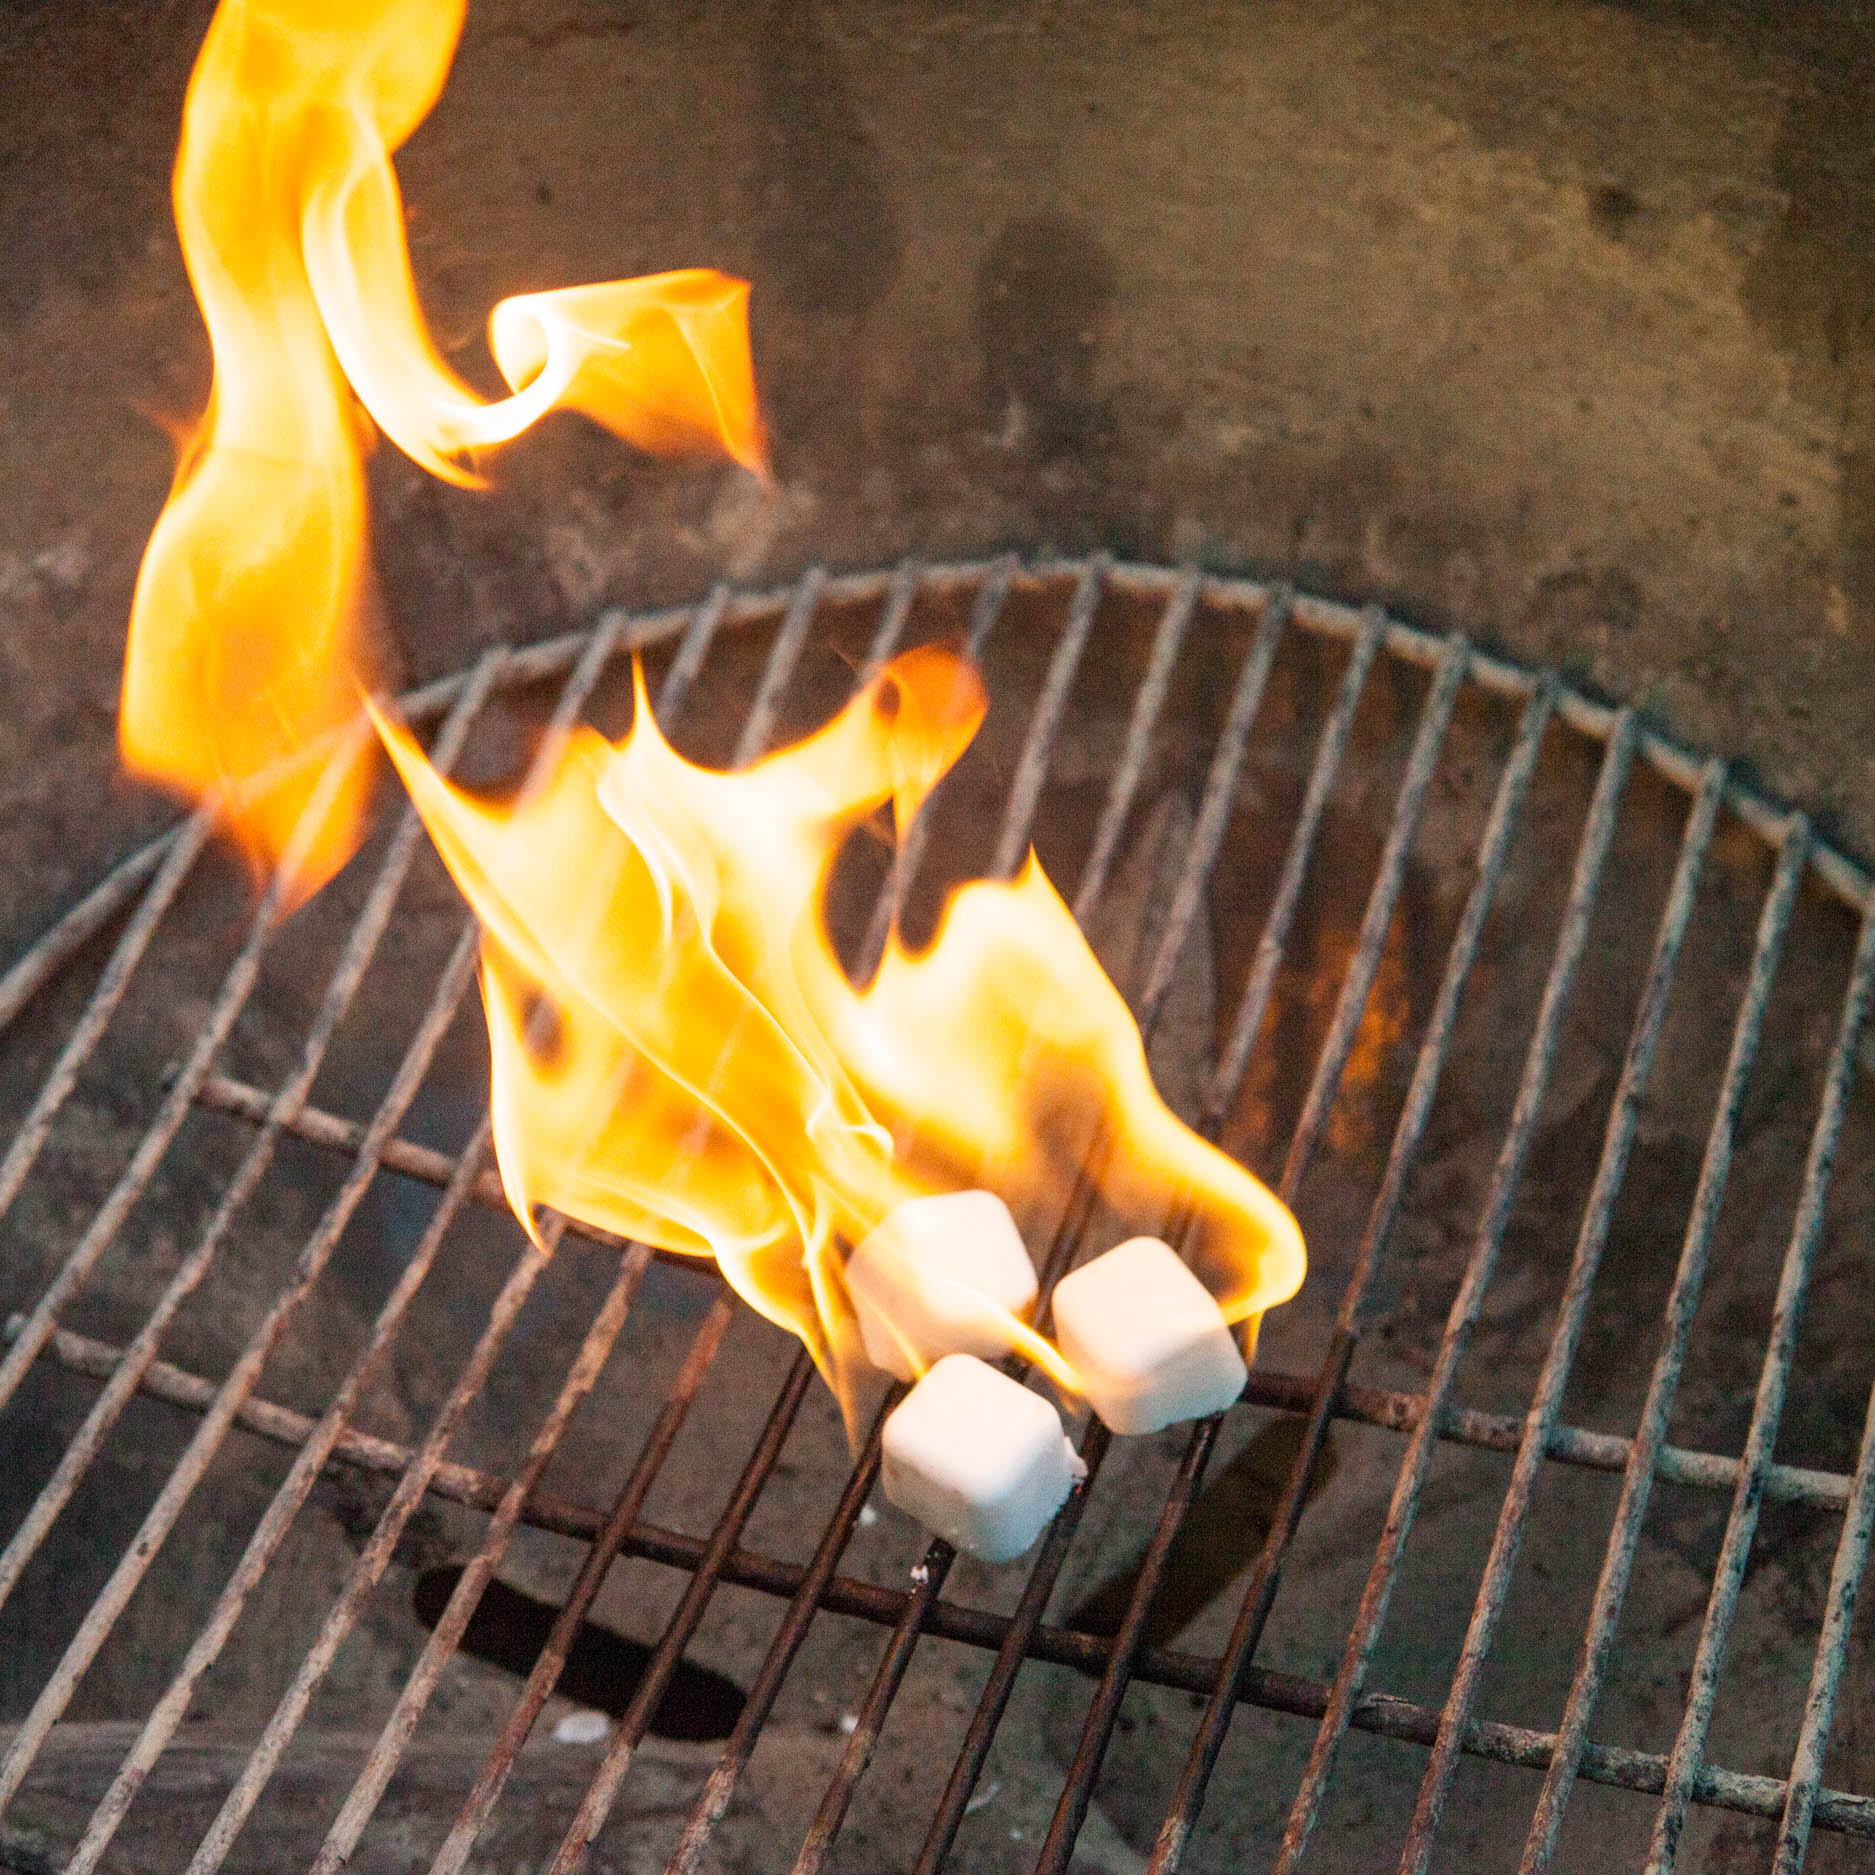 Charcoal Grilling for Beginners - In Search Of Yummy-ness